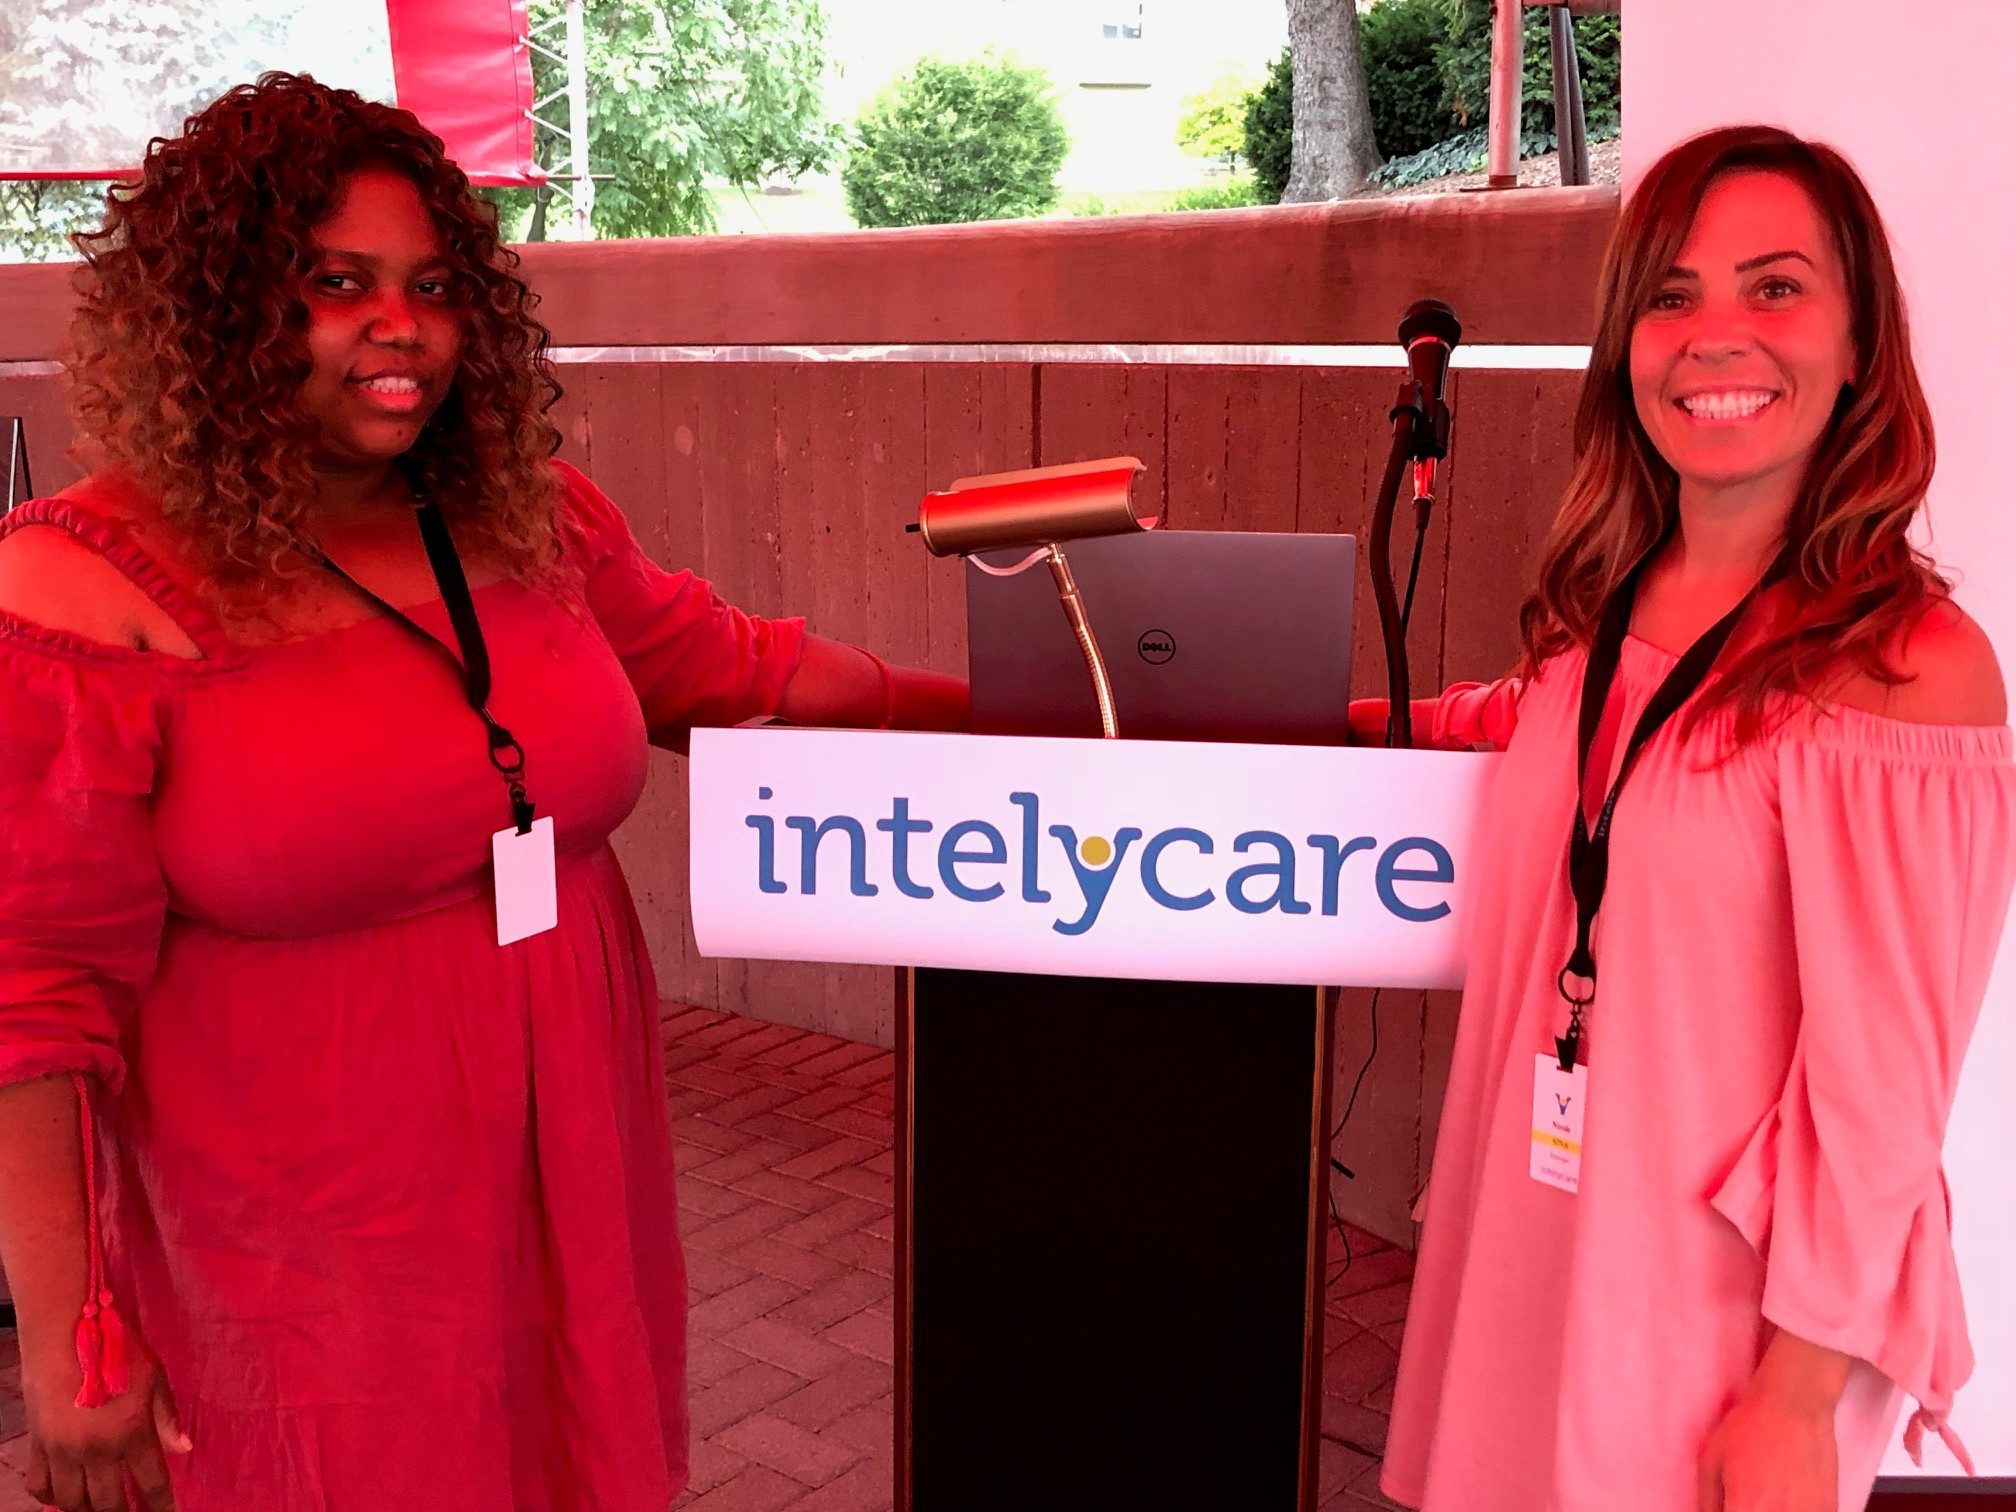 IntelyCare nurses smiling while standing at a podium during the welcome event in Cincinnati